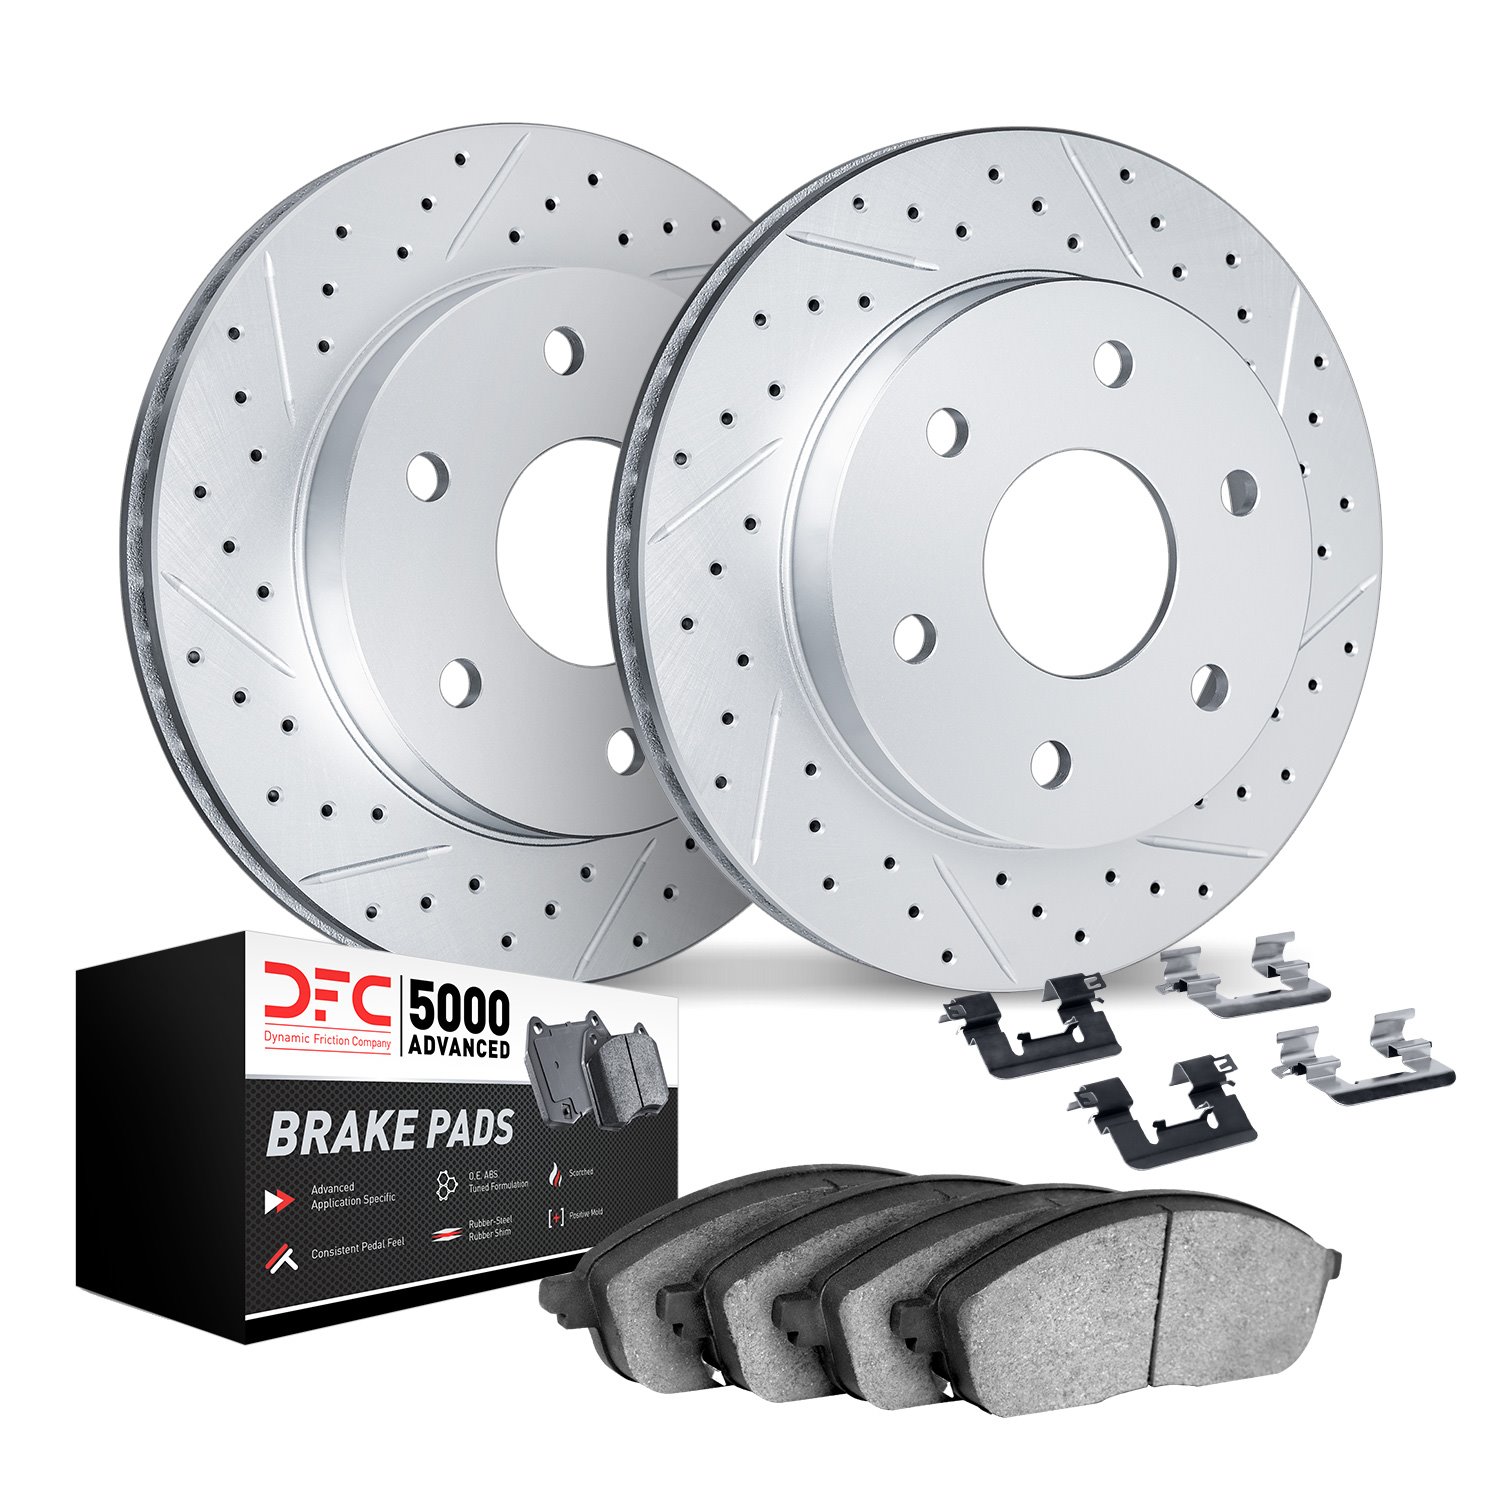 2512-48054 Geoperformance Drilled/Slotted Rotors w/5000 Advanced Brake Pads Kit & Hardware, 2002-2014 GM, Position: Rear